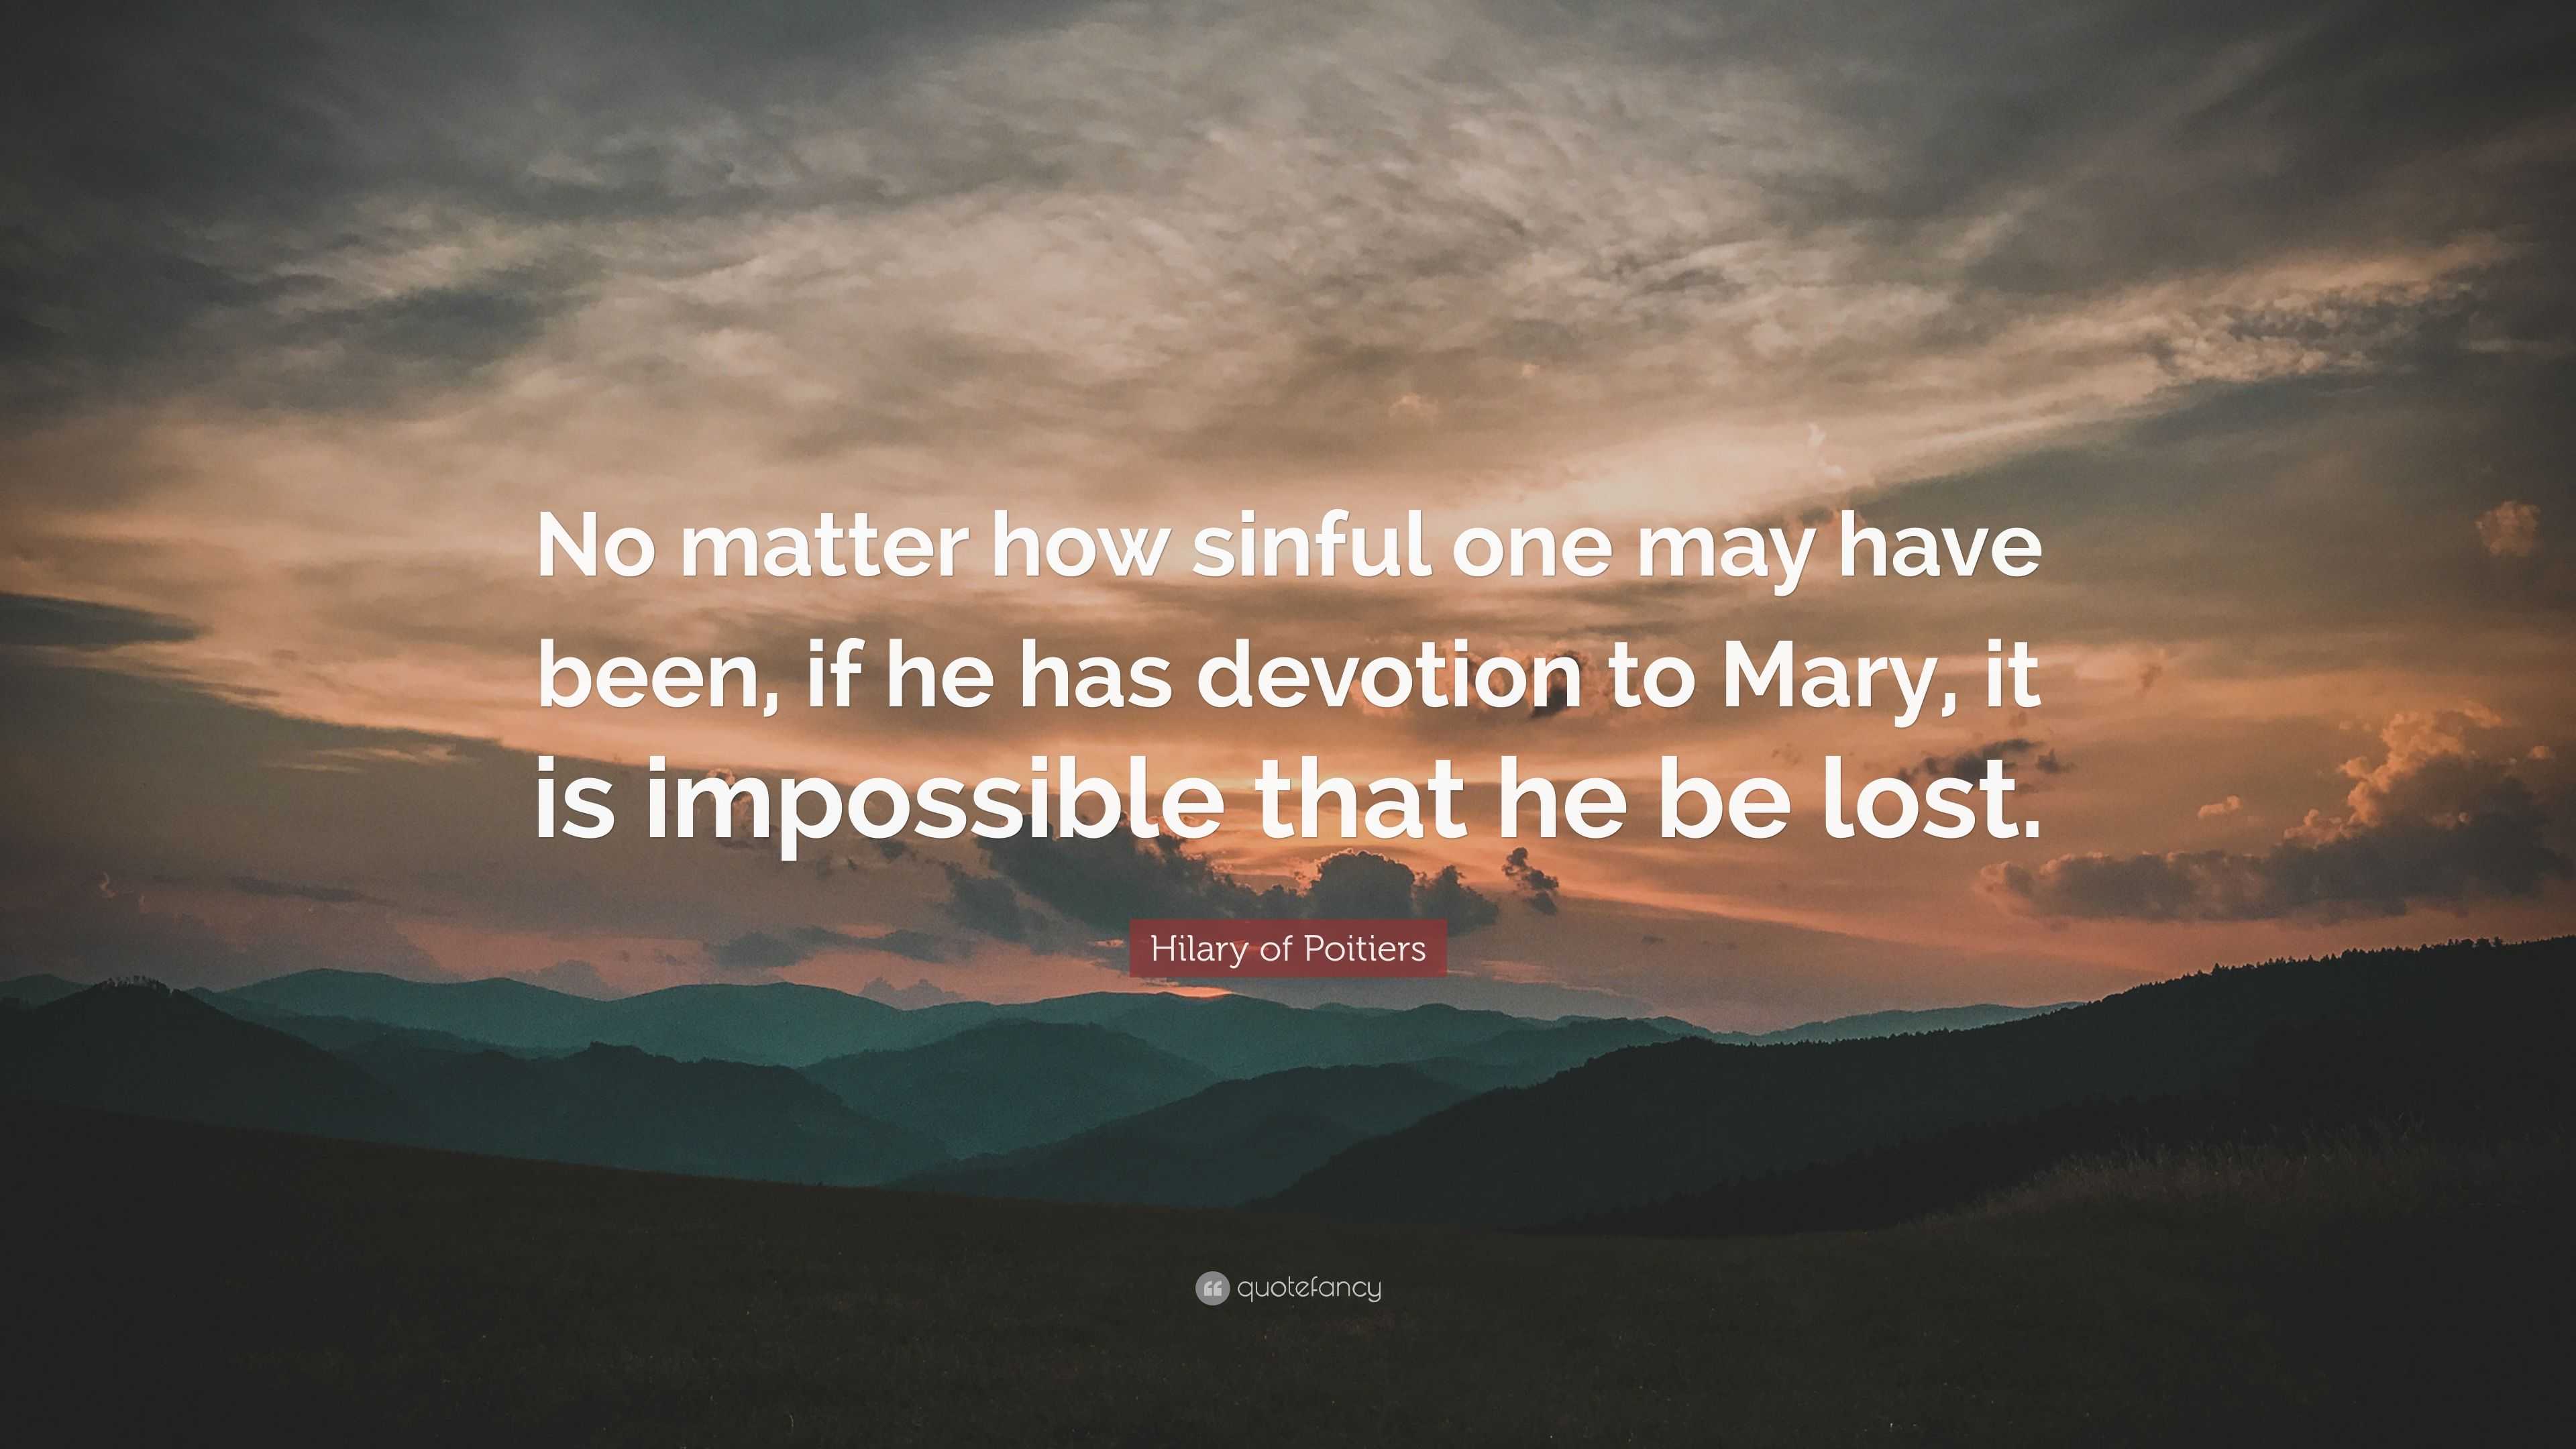 Hilary of Poitiers Quote “No matter how sinful one may have been, if